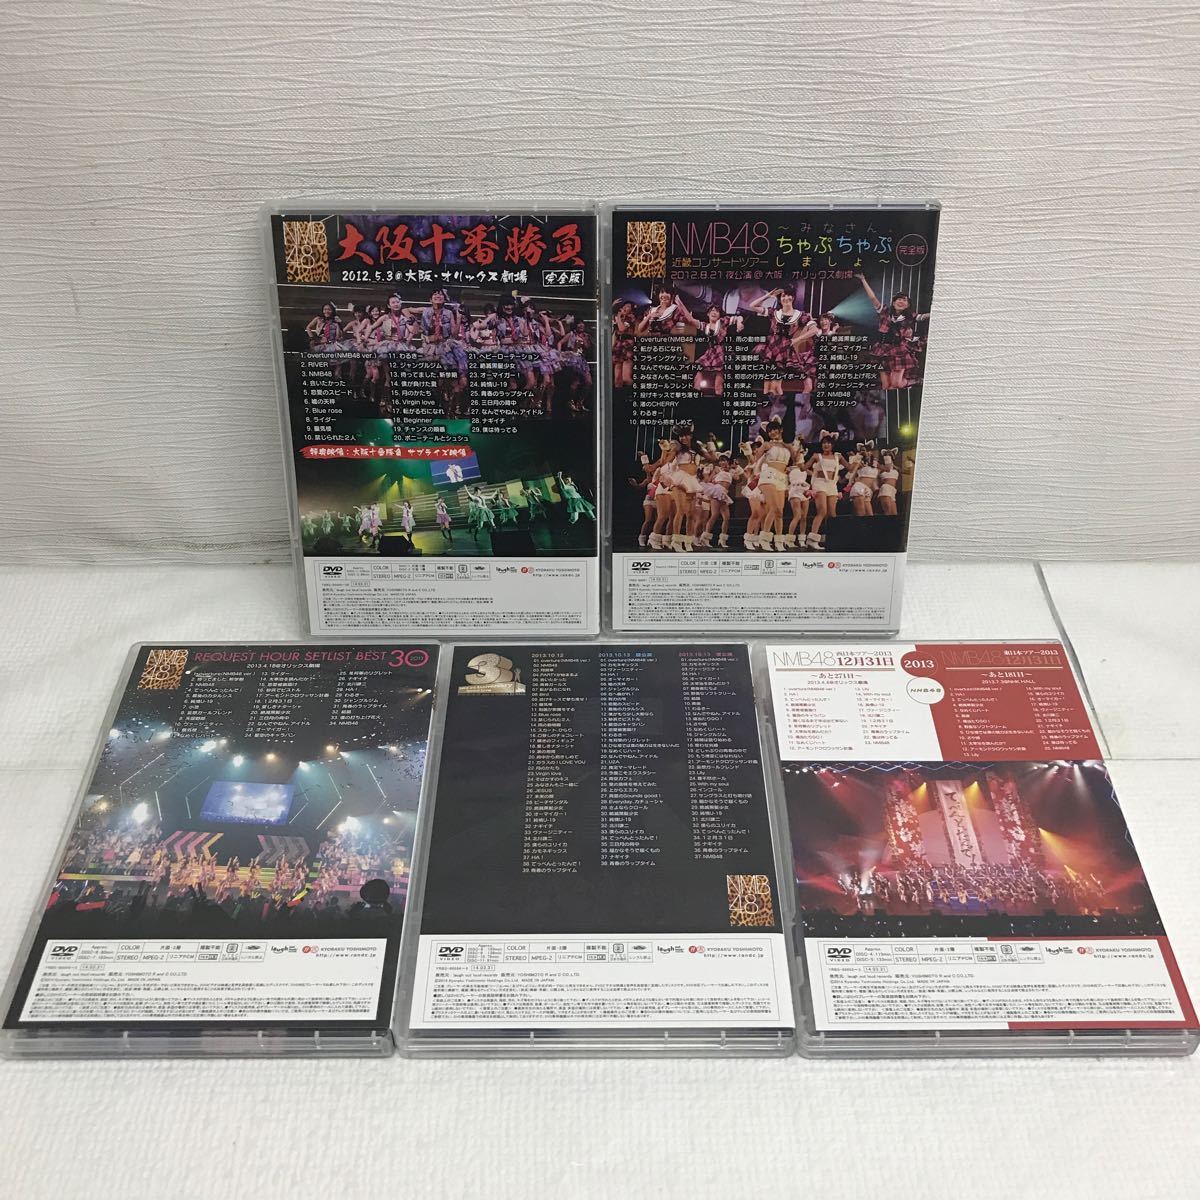 PY1113H NMB48 8 LIVE COLLECTION/5 LIVE COLLECTION 2014/DVD BOX ボックス 2本セット セル版 ライブ コレクション ツアー TOUR _画像6